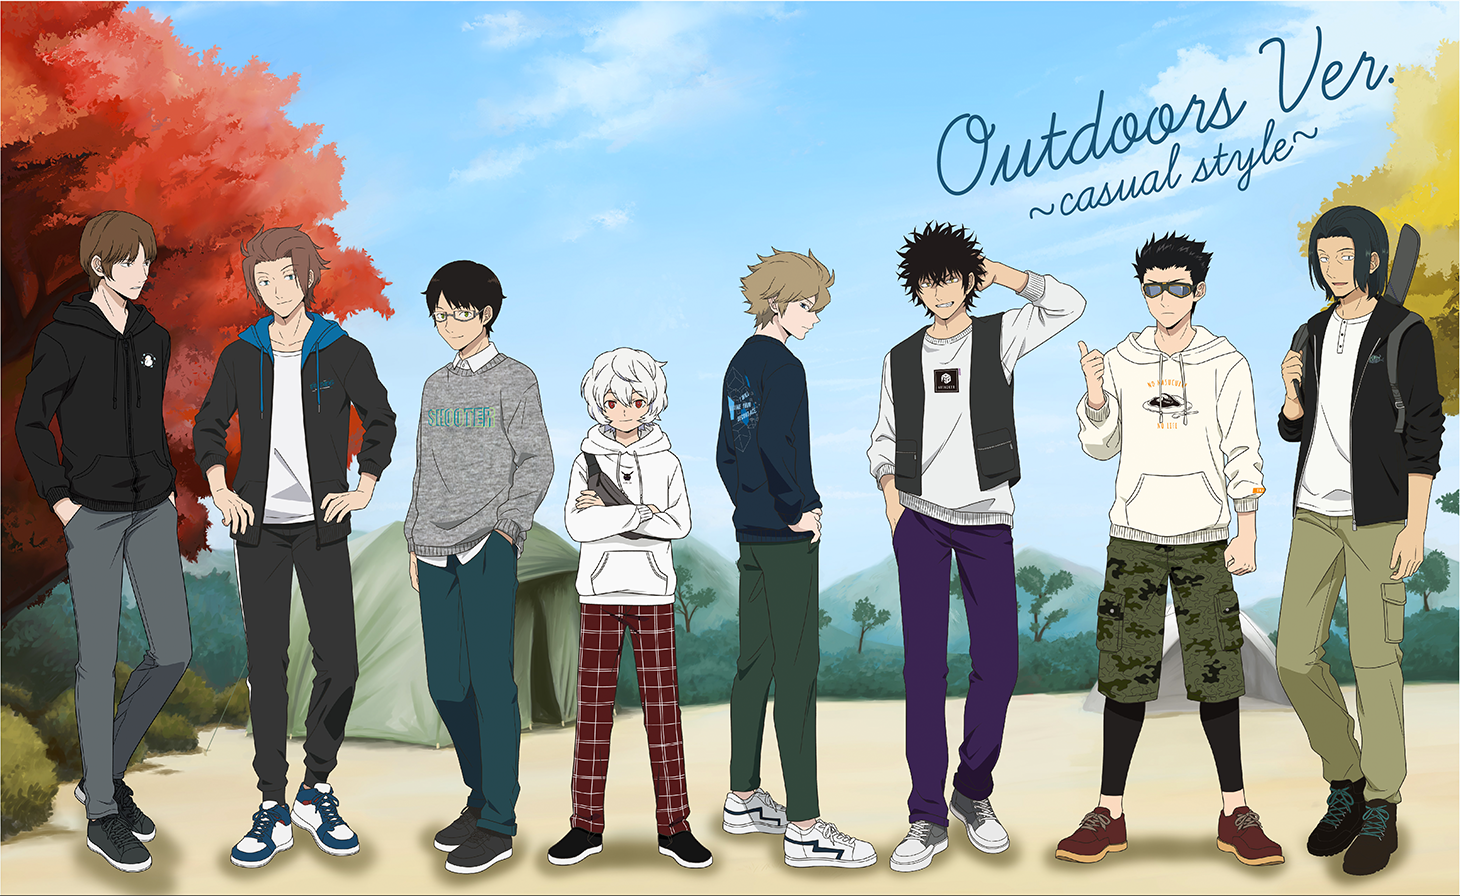 Outdoors Ver -casual style-